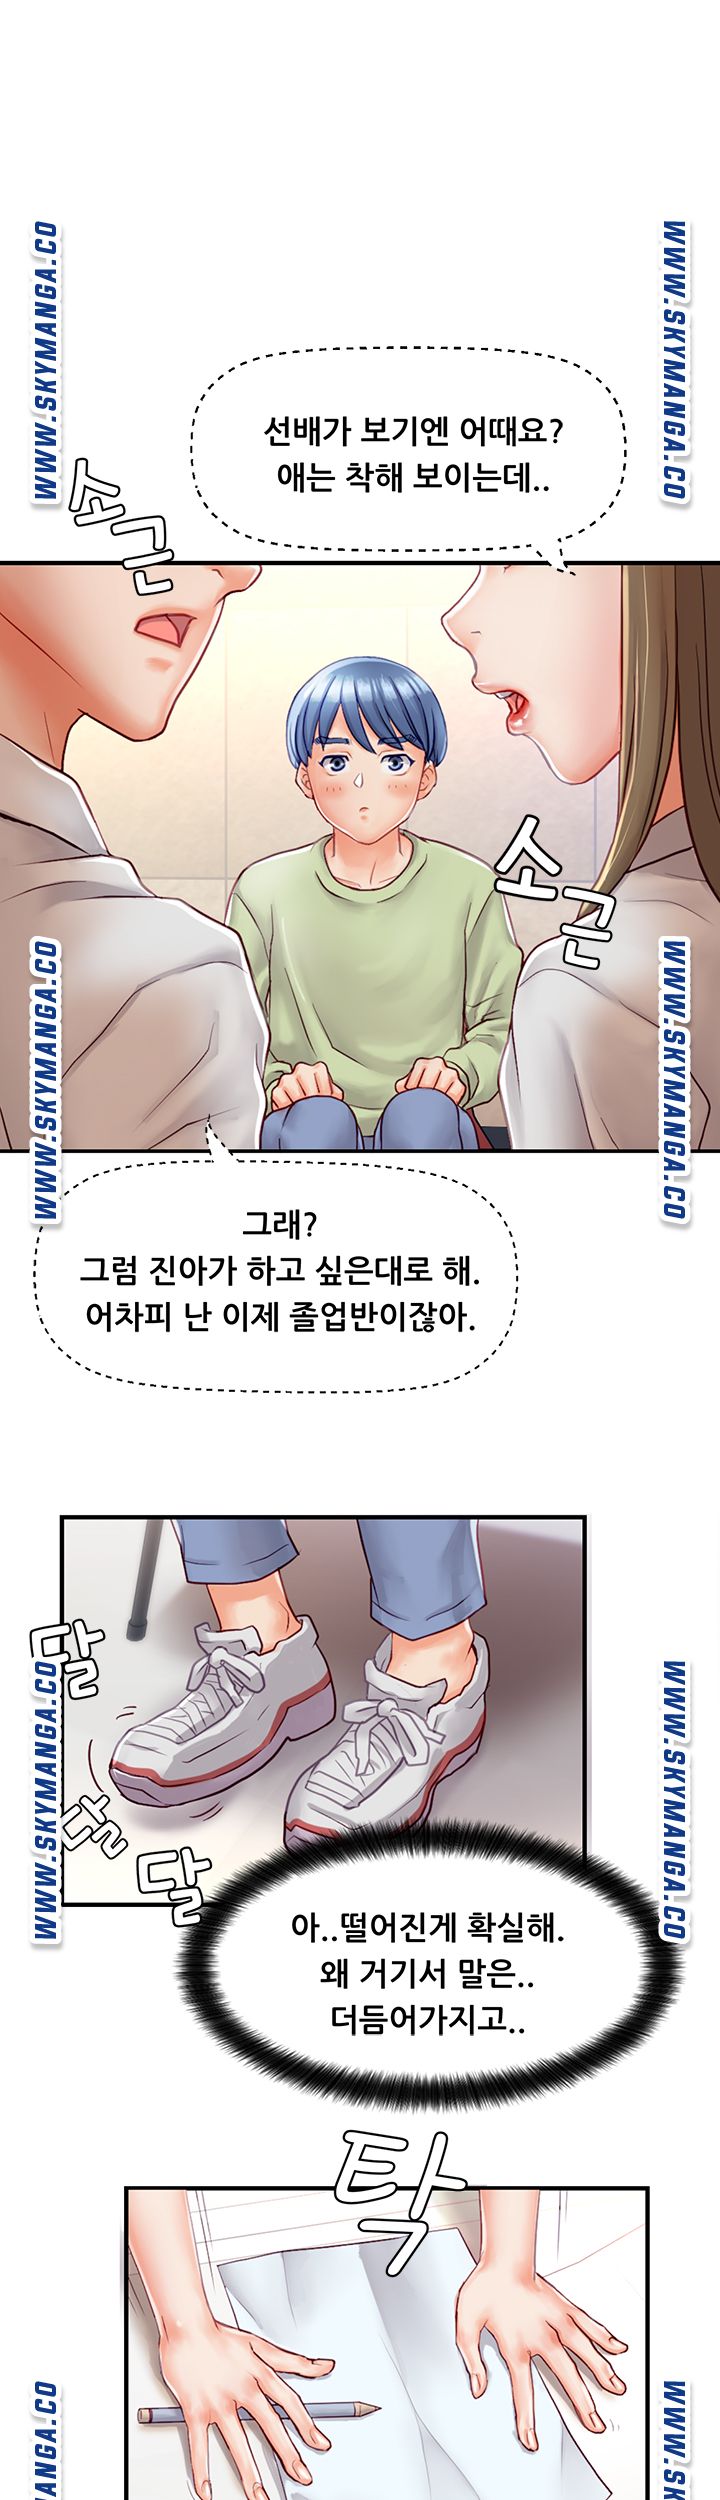 Broadcasting Club Raw - Chapter 1 Page 15